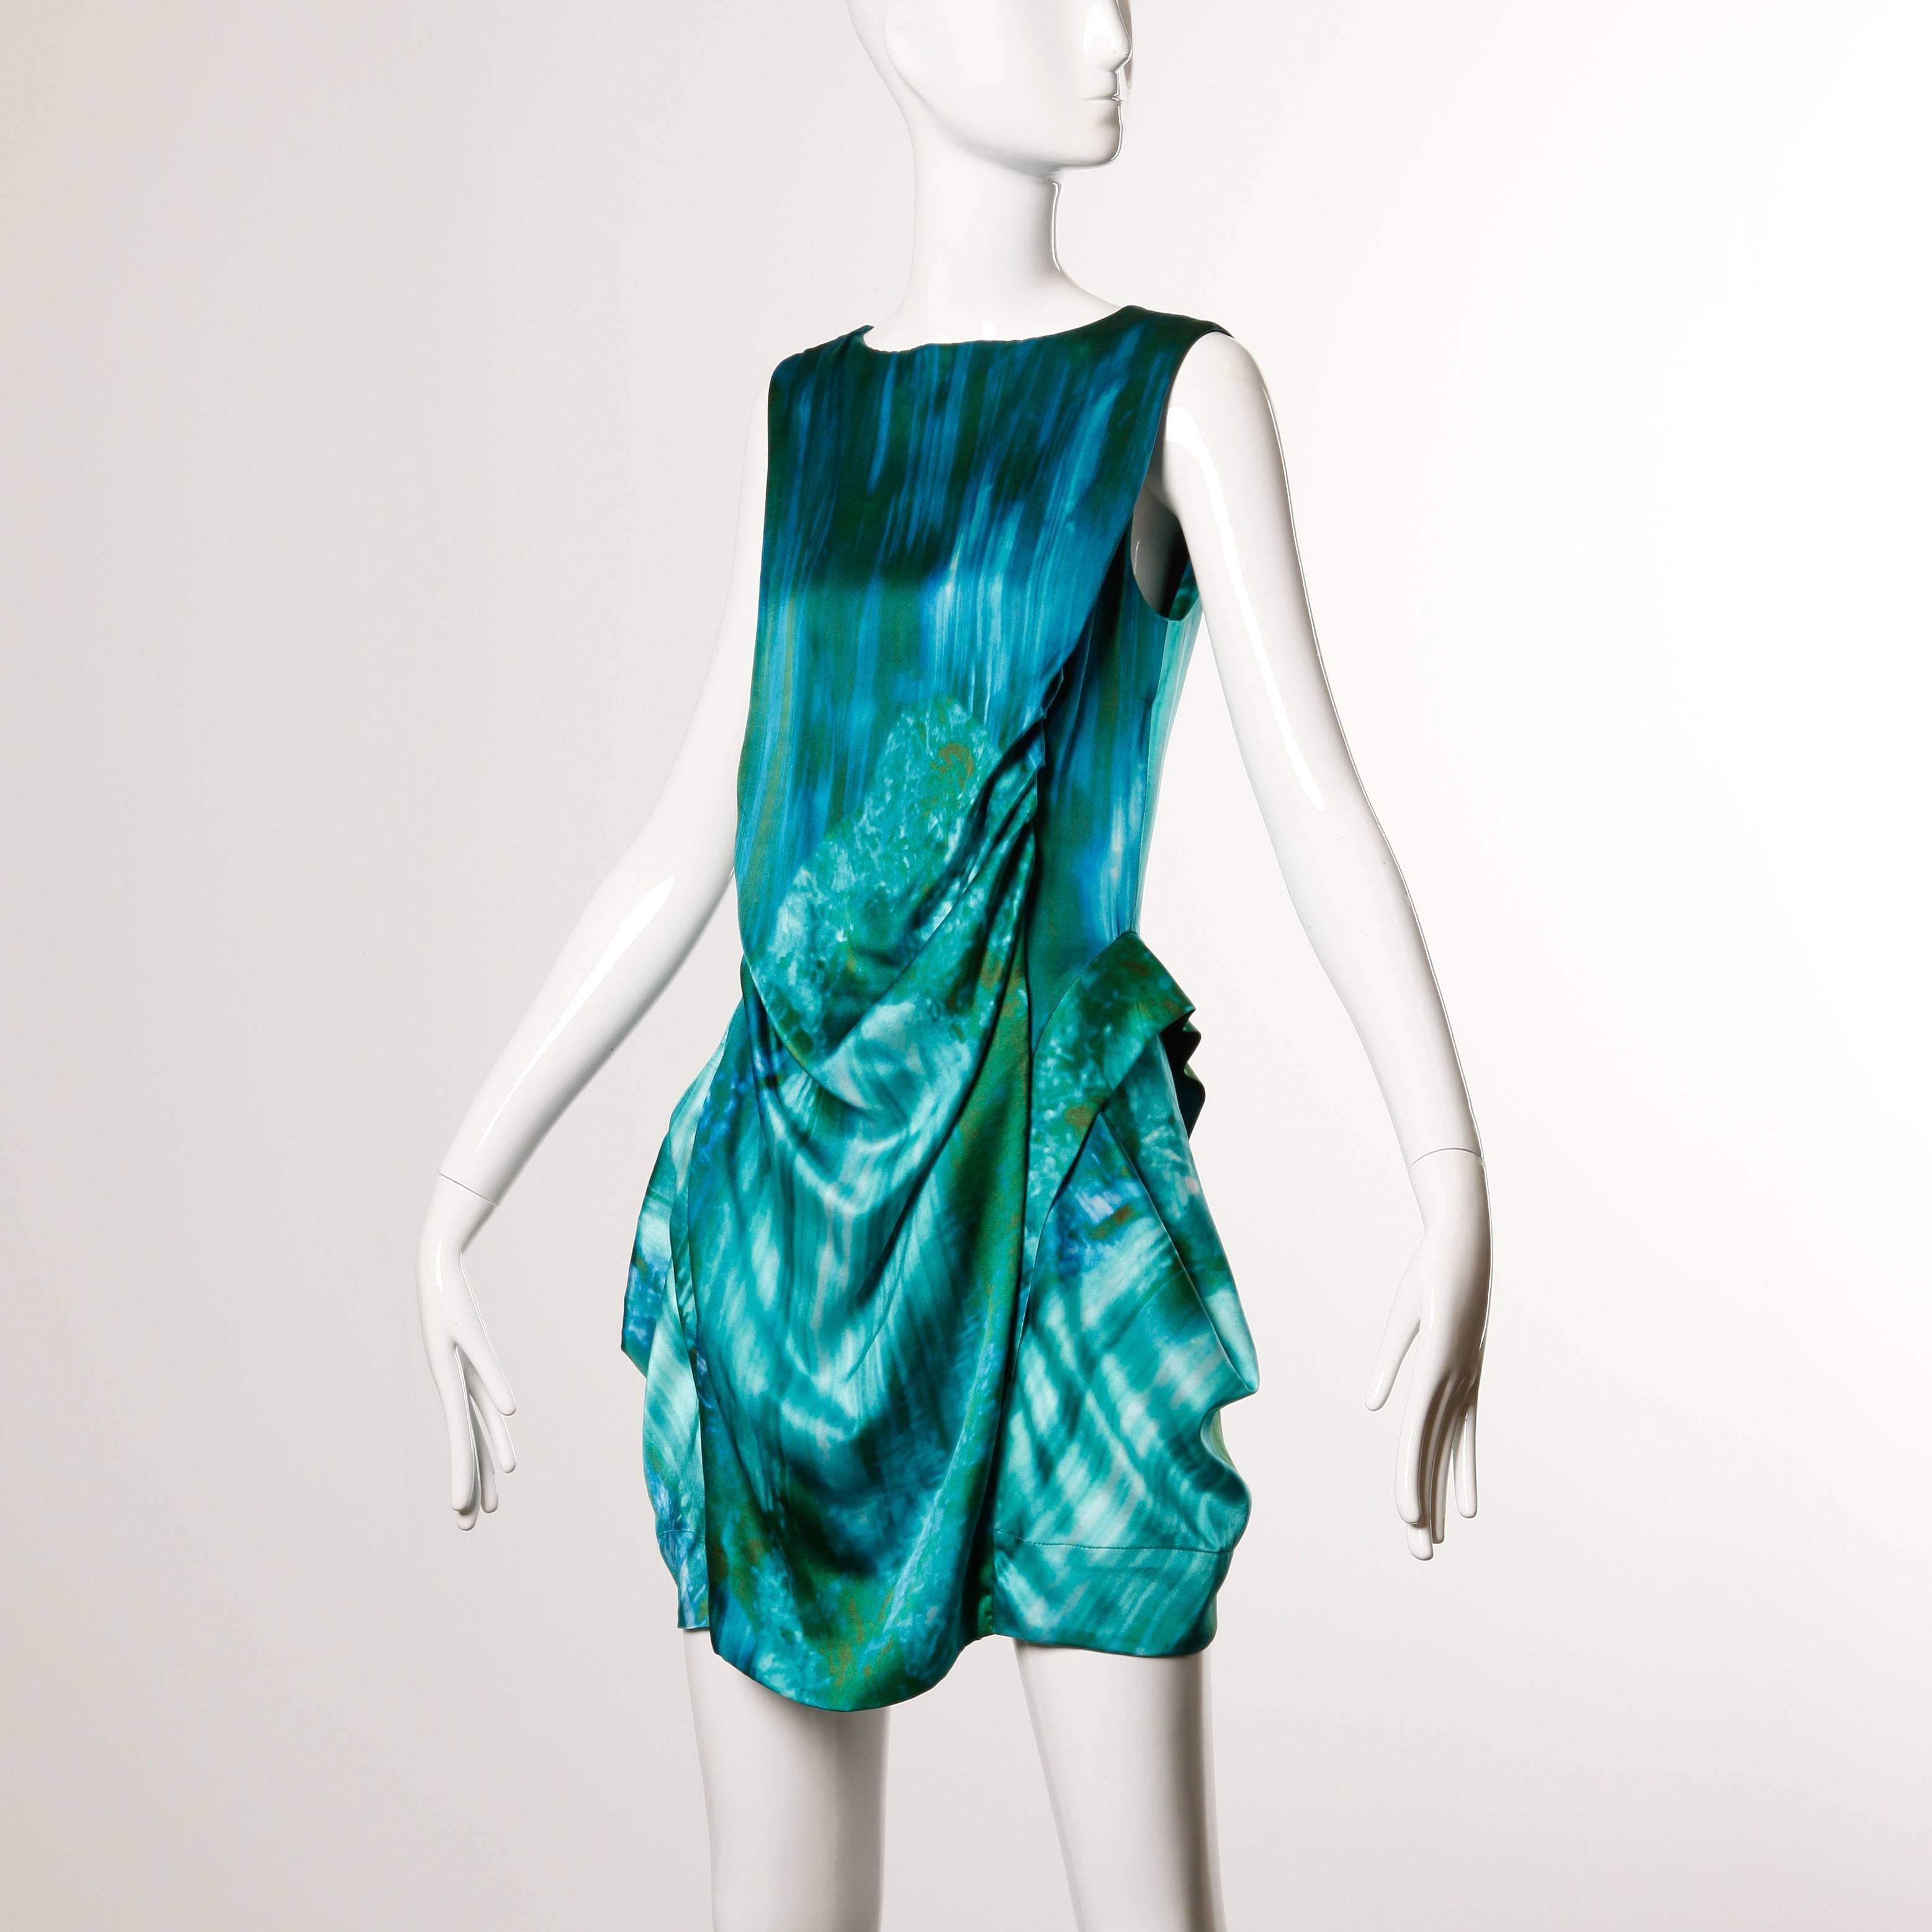 Unique water color photo print dress in shades of blue and green silk by Peter Pilotto.

Details: 

Partially Lined
Back Zip Closure
Marked Size: UK 10
Estimated Size: S-M
Color: Blue/ Green
Fabric: 100% Silk
Label: Peter